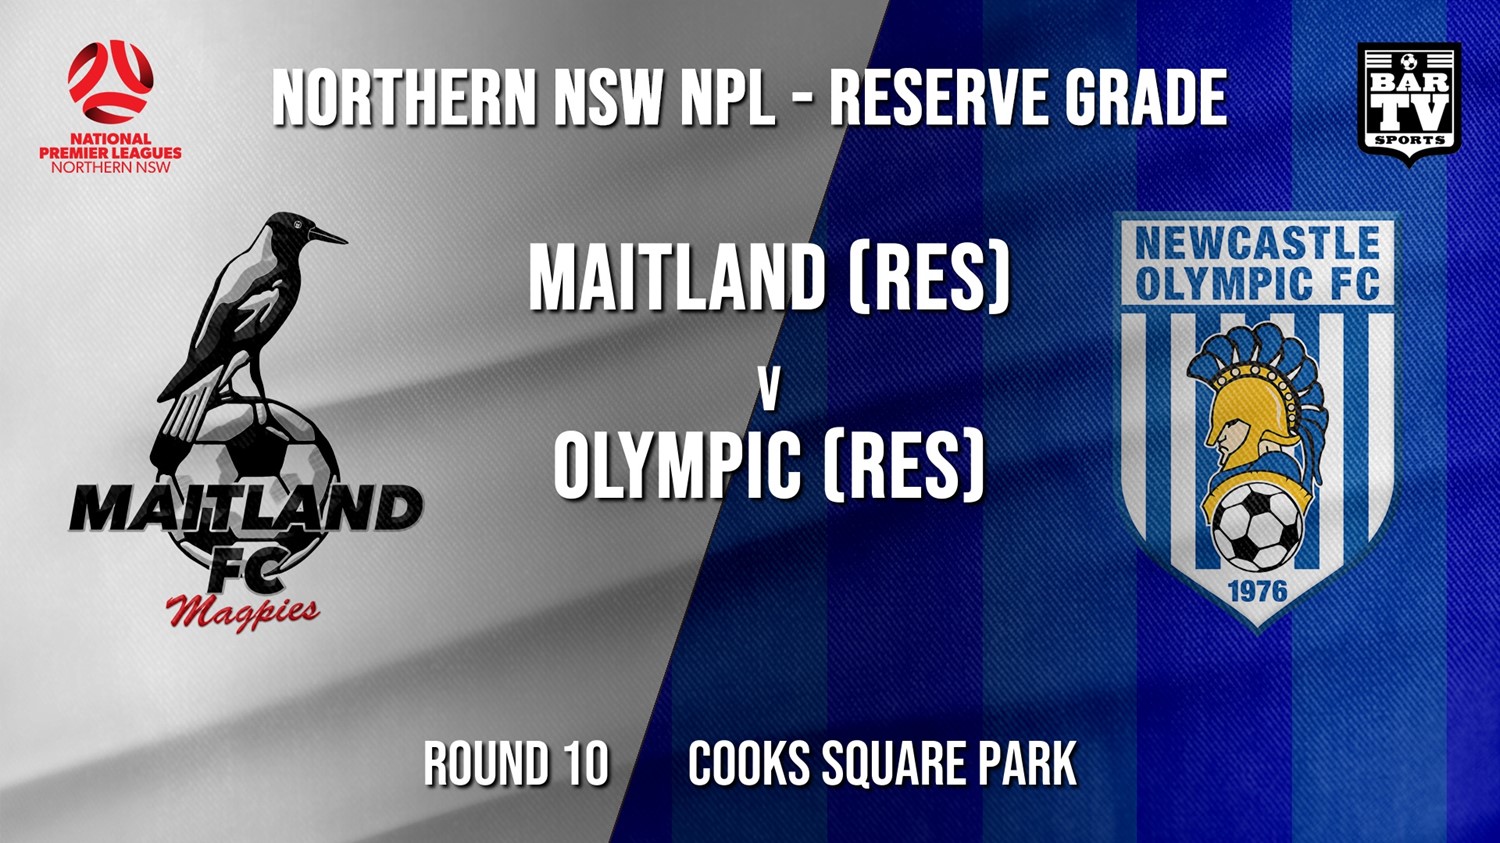 NPL NNSW RES Round 10 - Maitland FC (Res) v Newcastle Olympic (Res) Minigame Slate Image